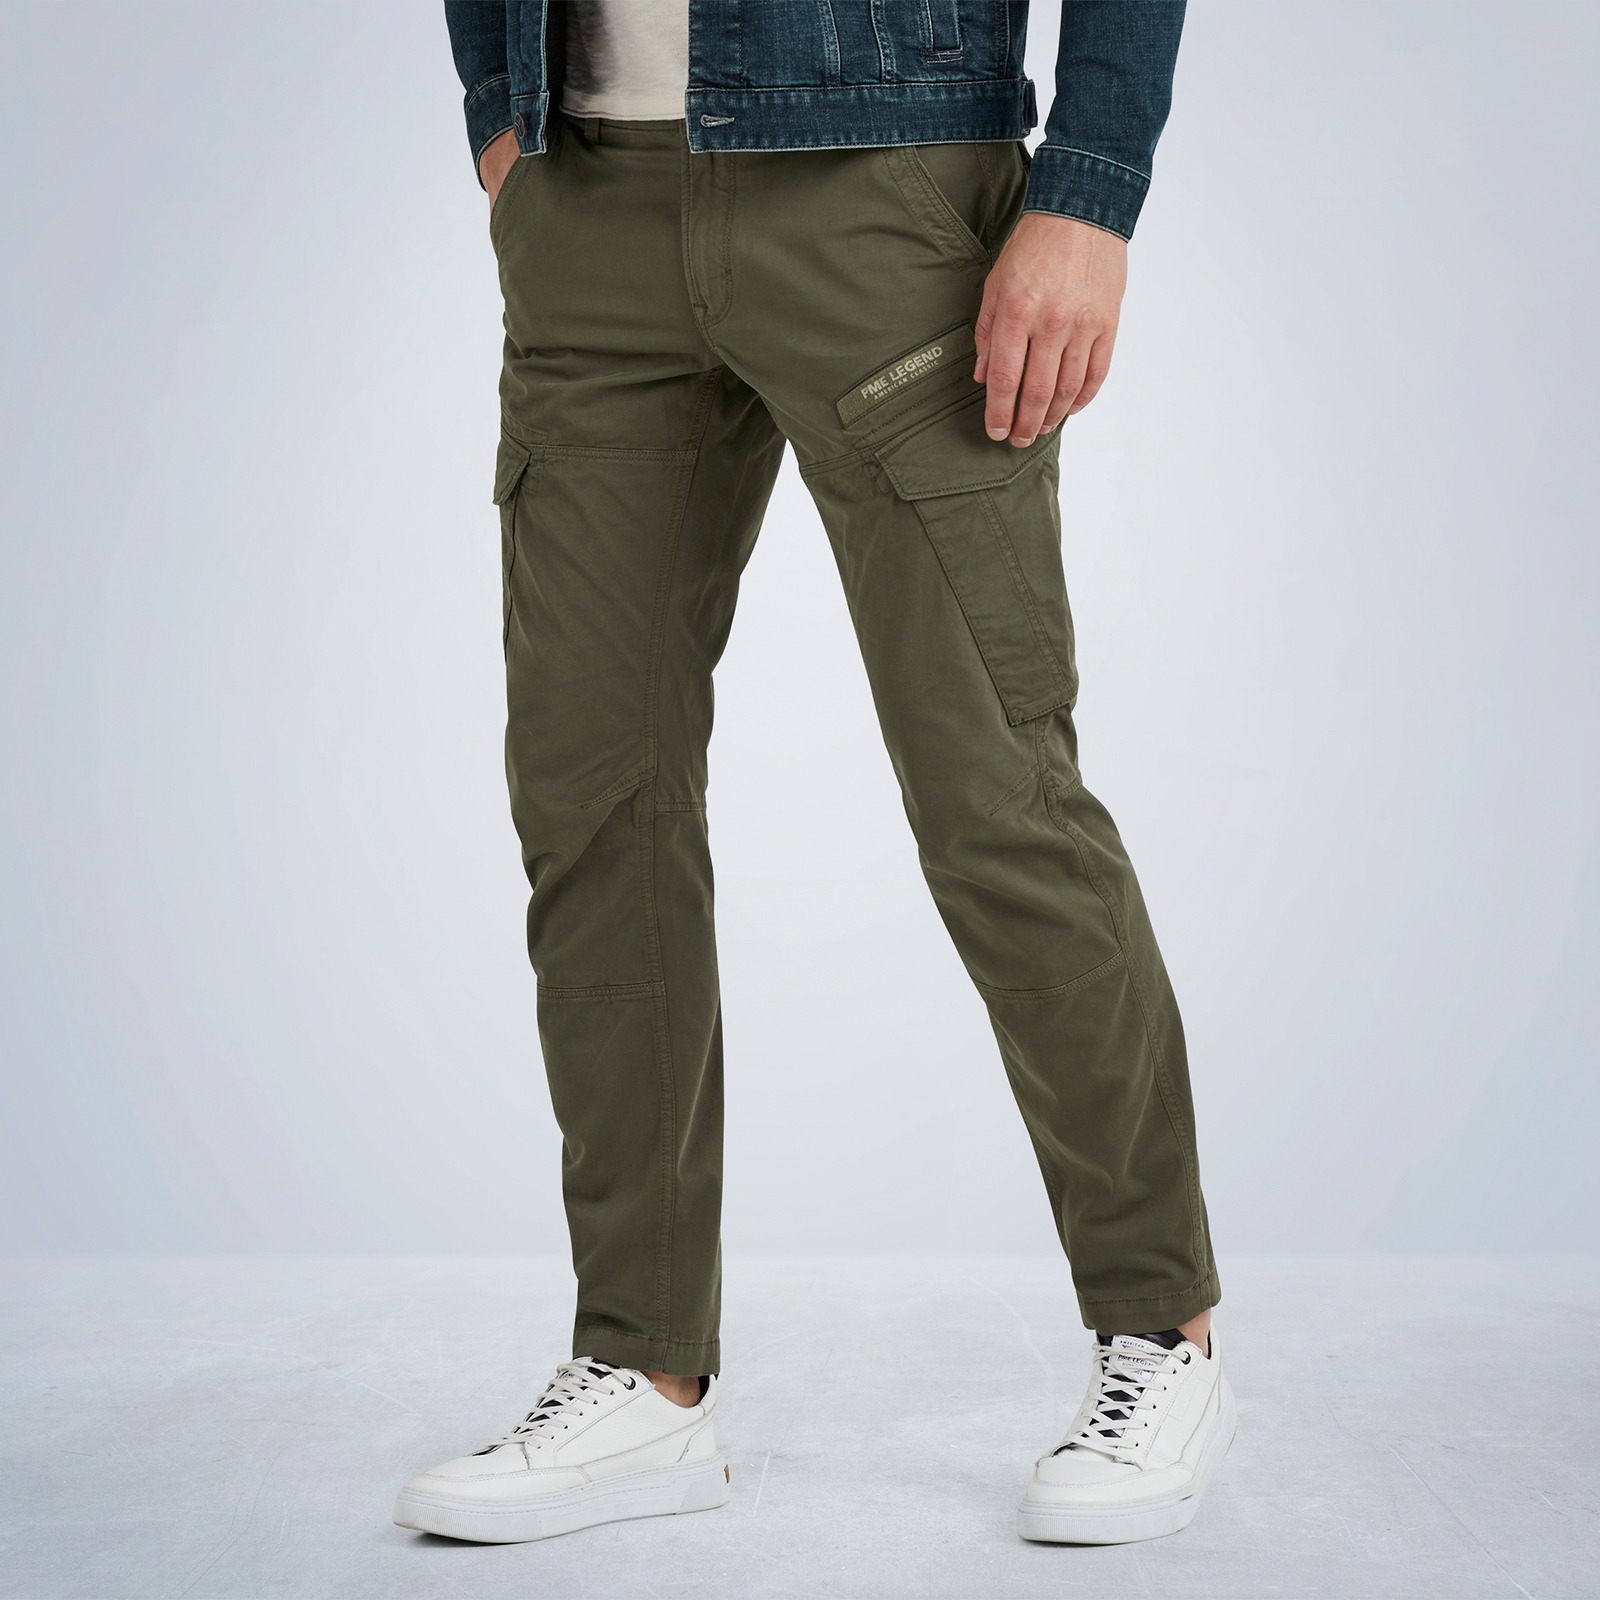 PME shipping | Tapered and Cargohose Fit | Nordrop Free returns LEGEND